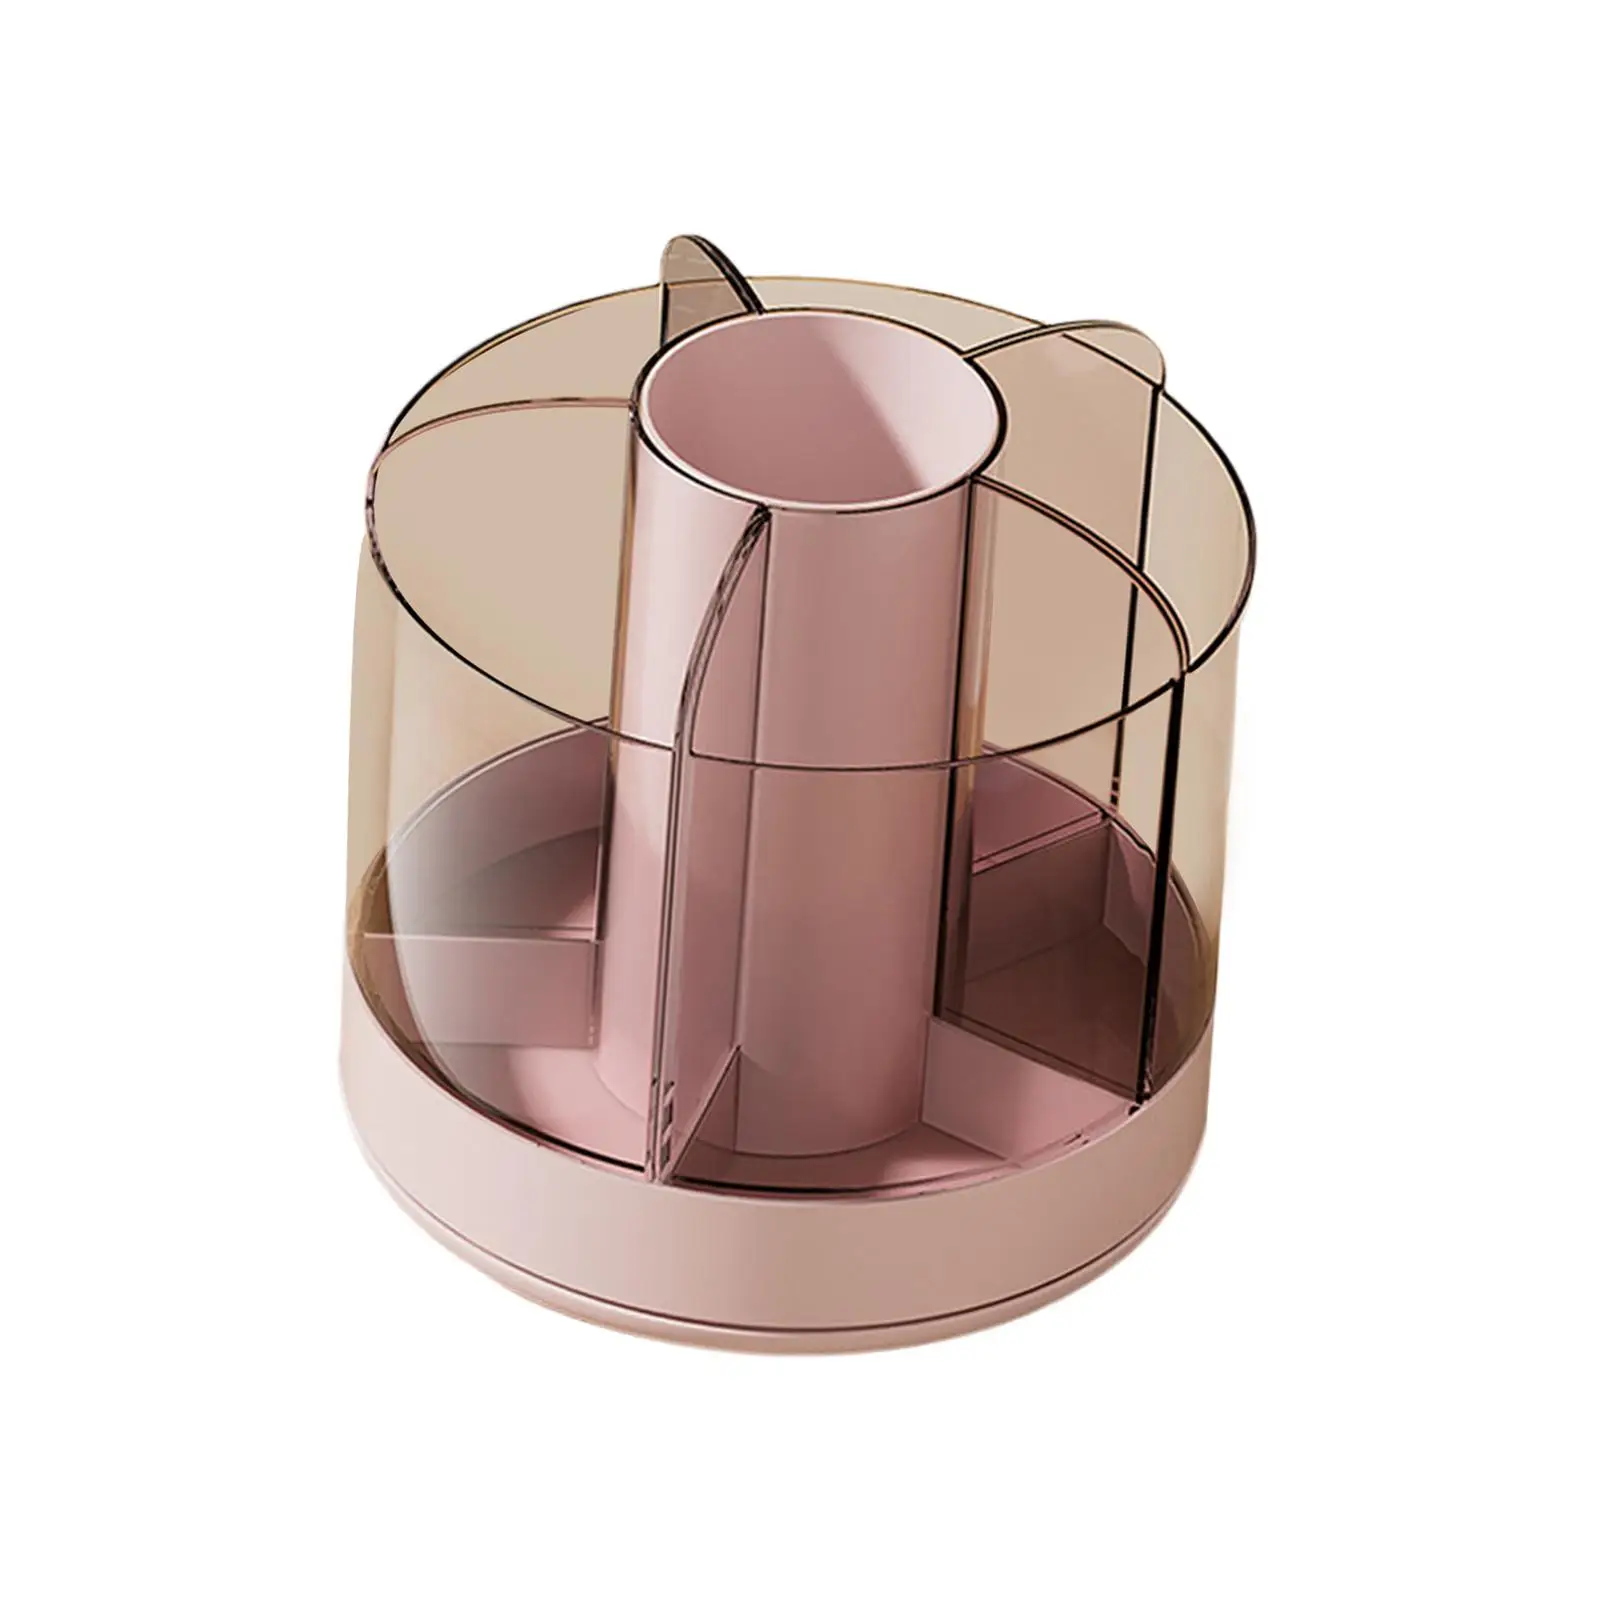 Pencil Holder Cup for Desk Clear Makeup Brush Holder Rotating Multifunction Pen Organizers for Art Supplies Eyeliner Pencil